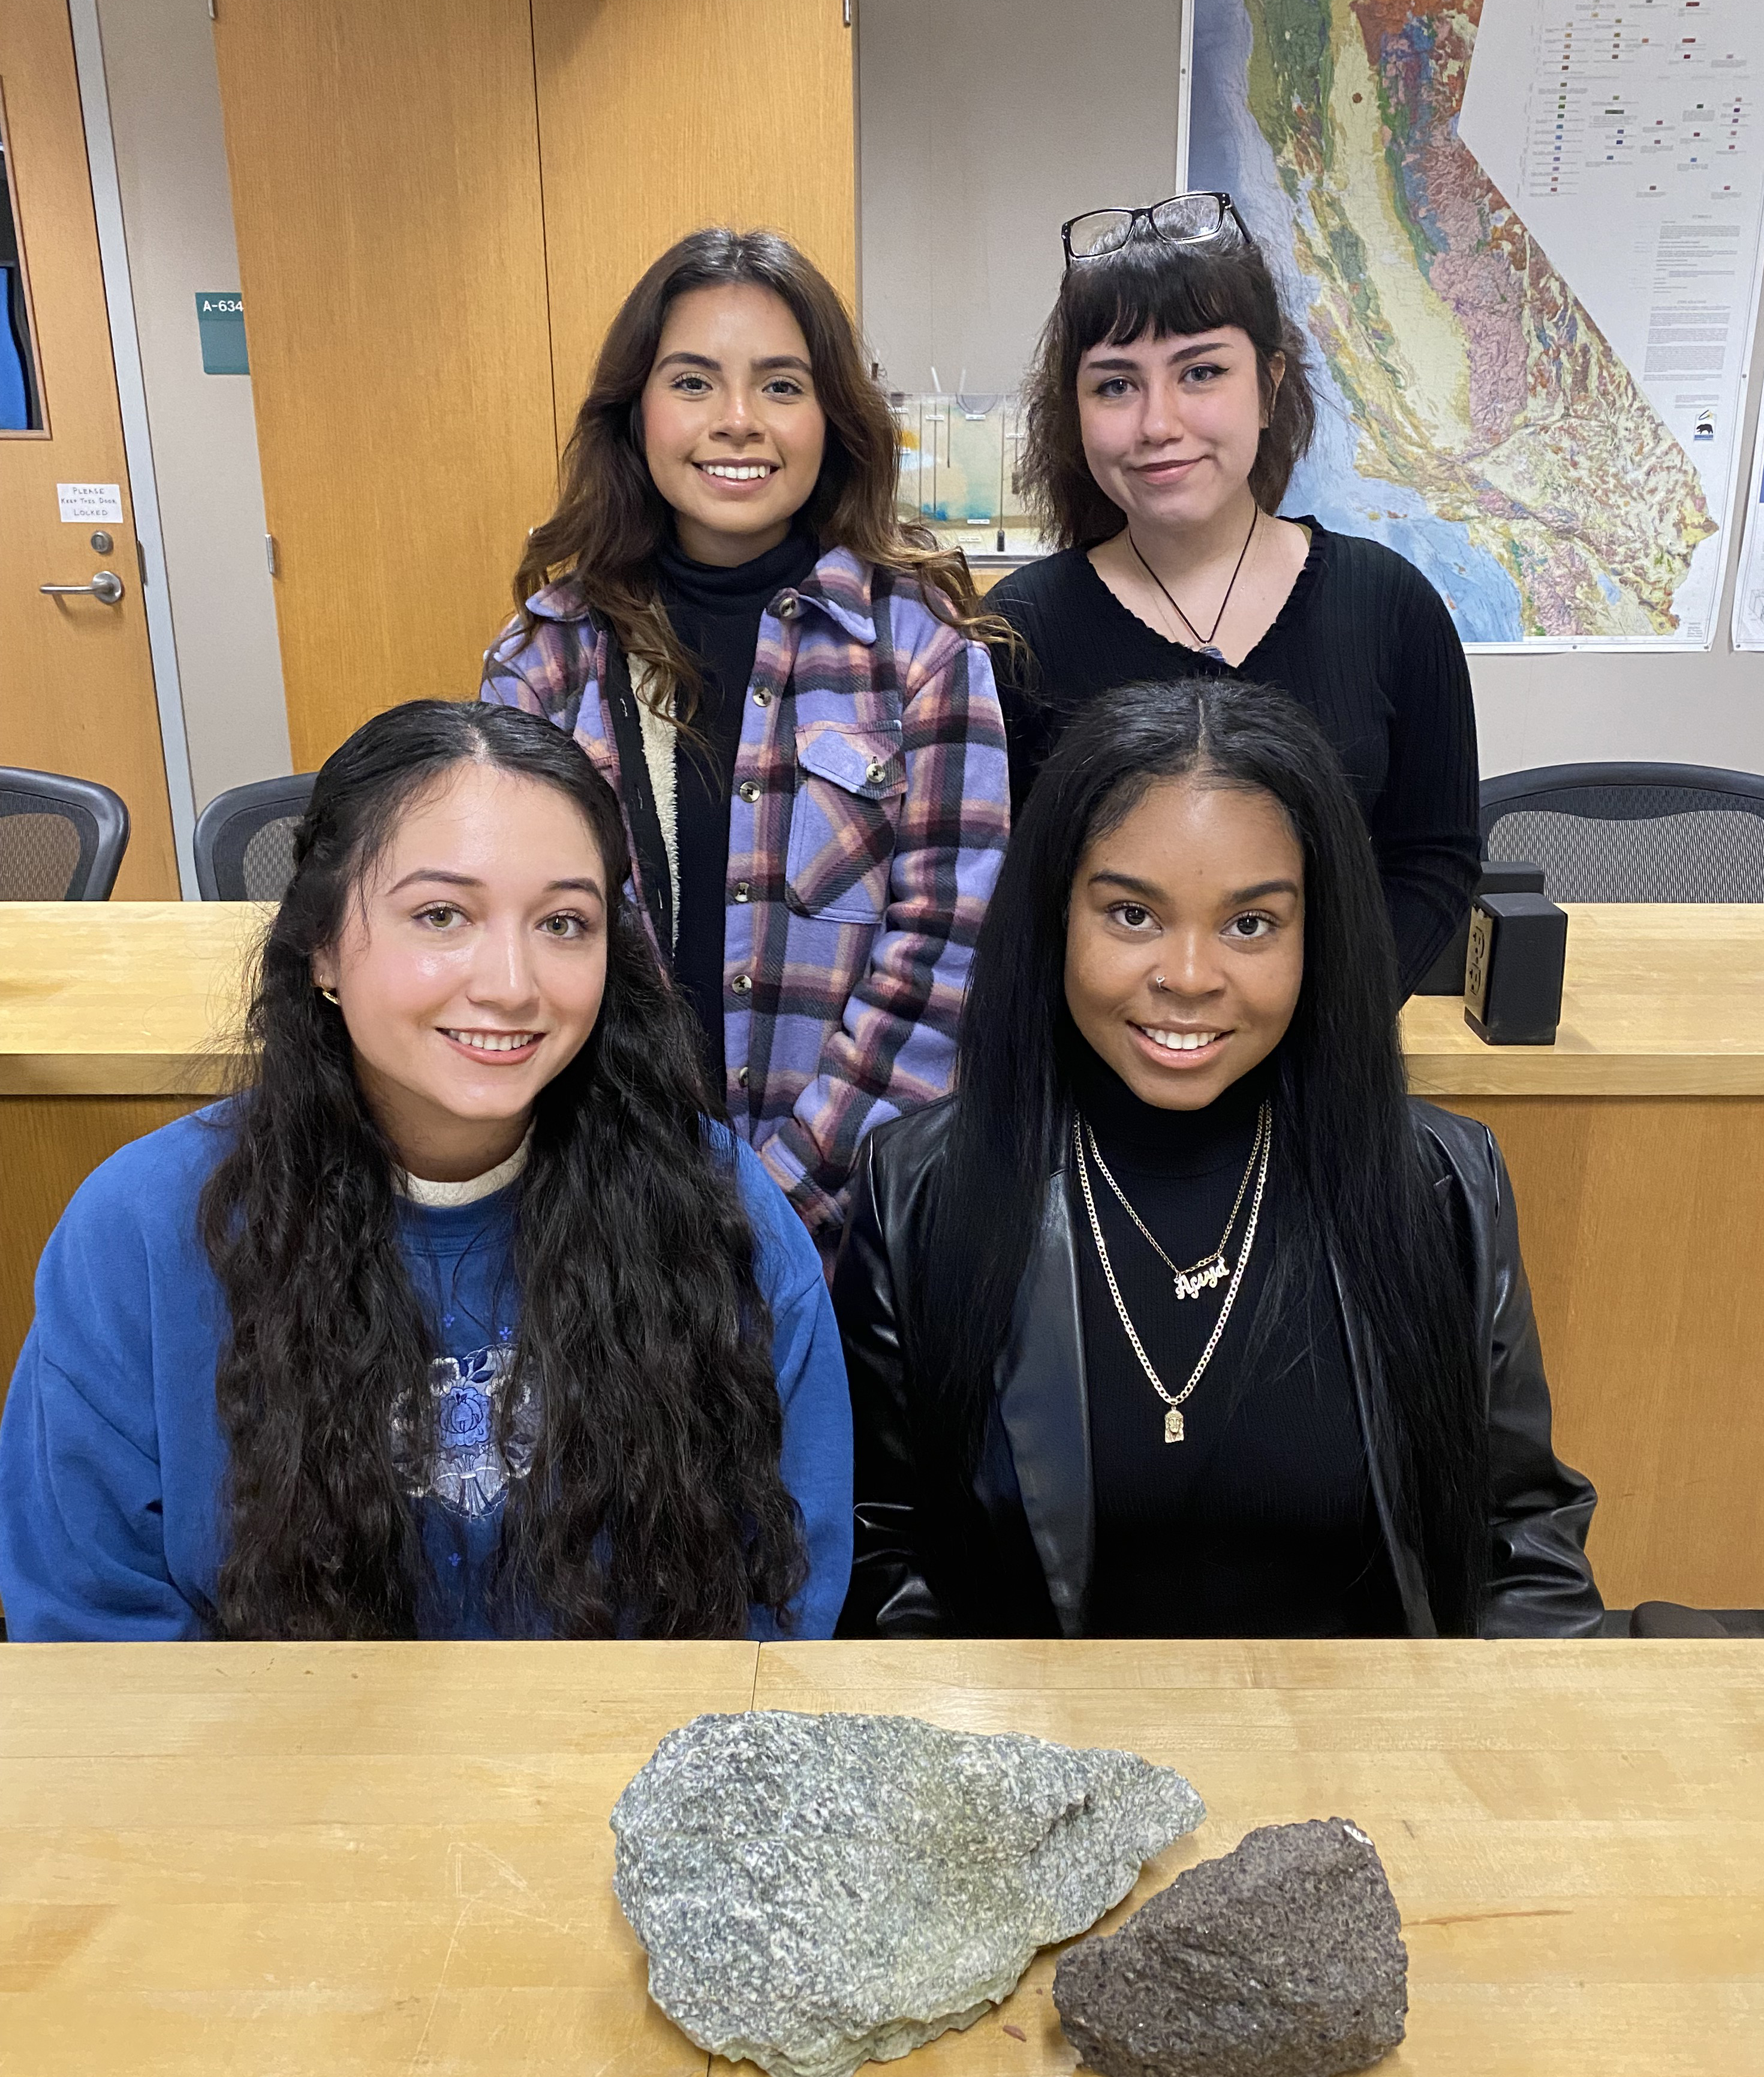 Four woman face the camera, arranged two by two, in a geology classroom. Two rocks sit on a table in front of them.